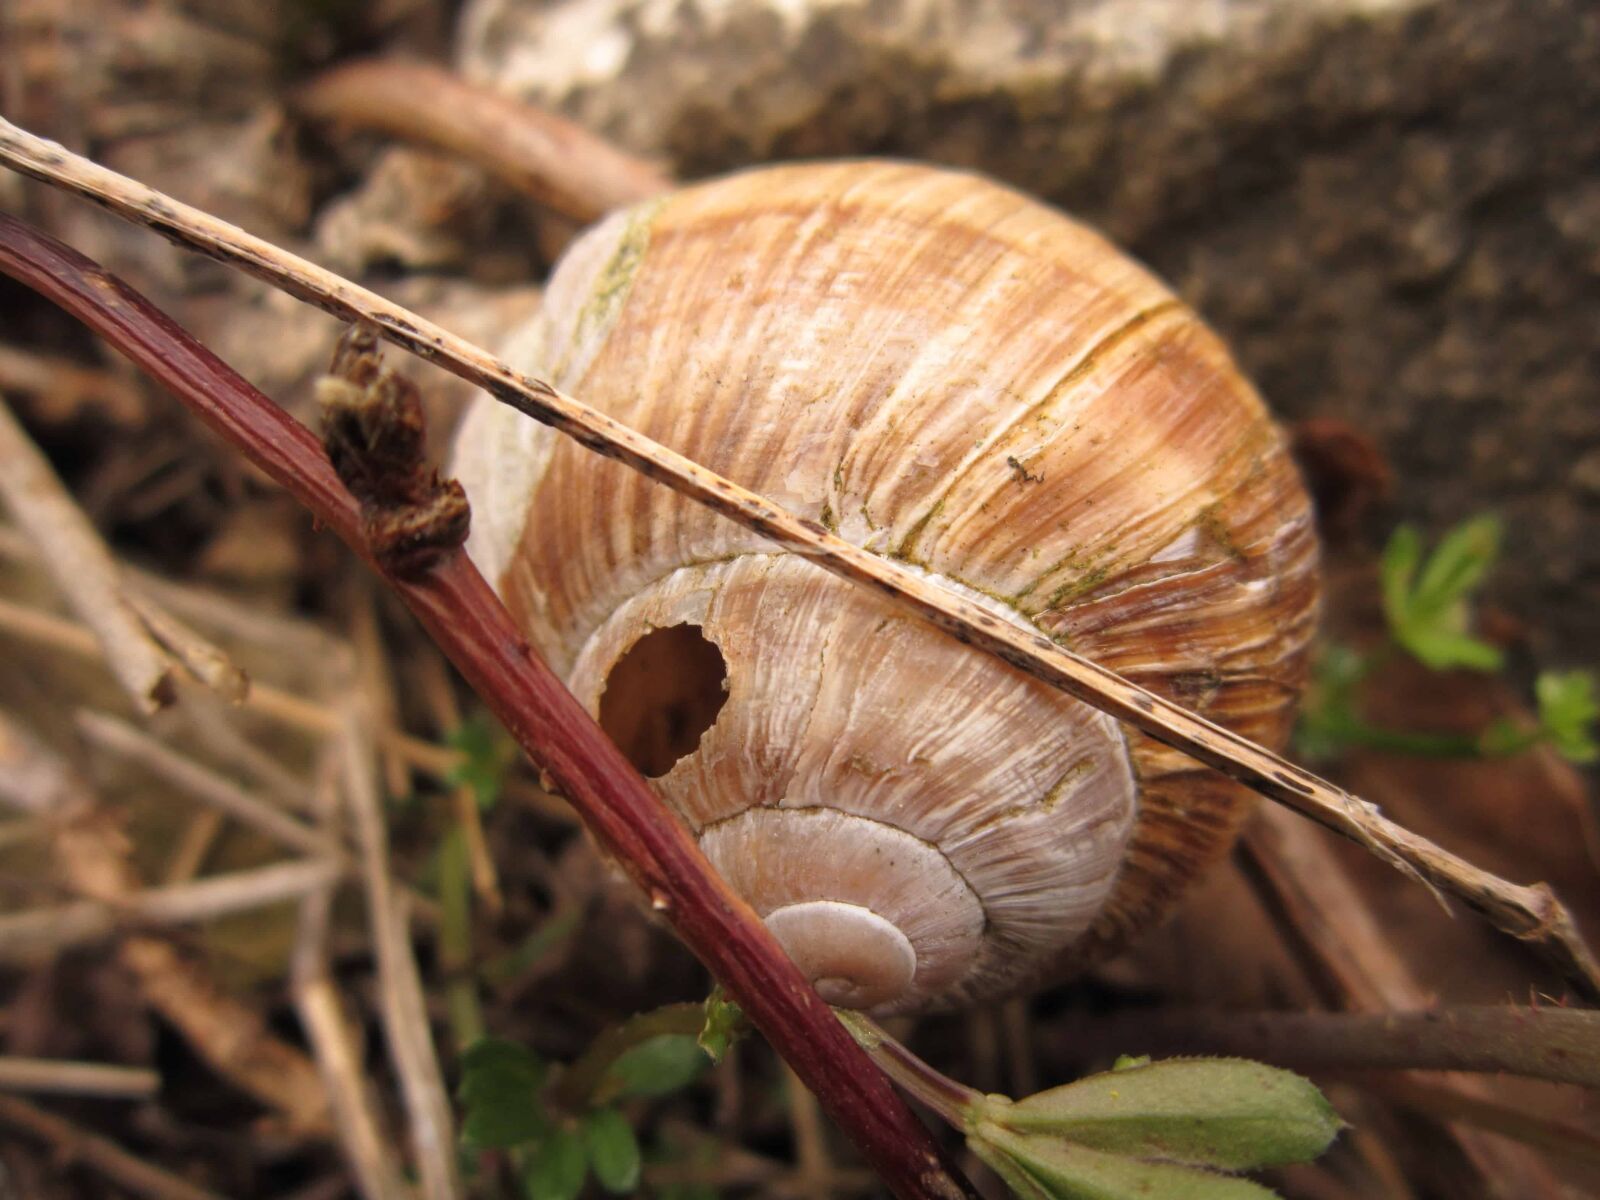 Canon PowerShot A3200 IS sample photo. Nature, food, gastropod, snail photography